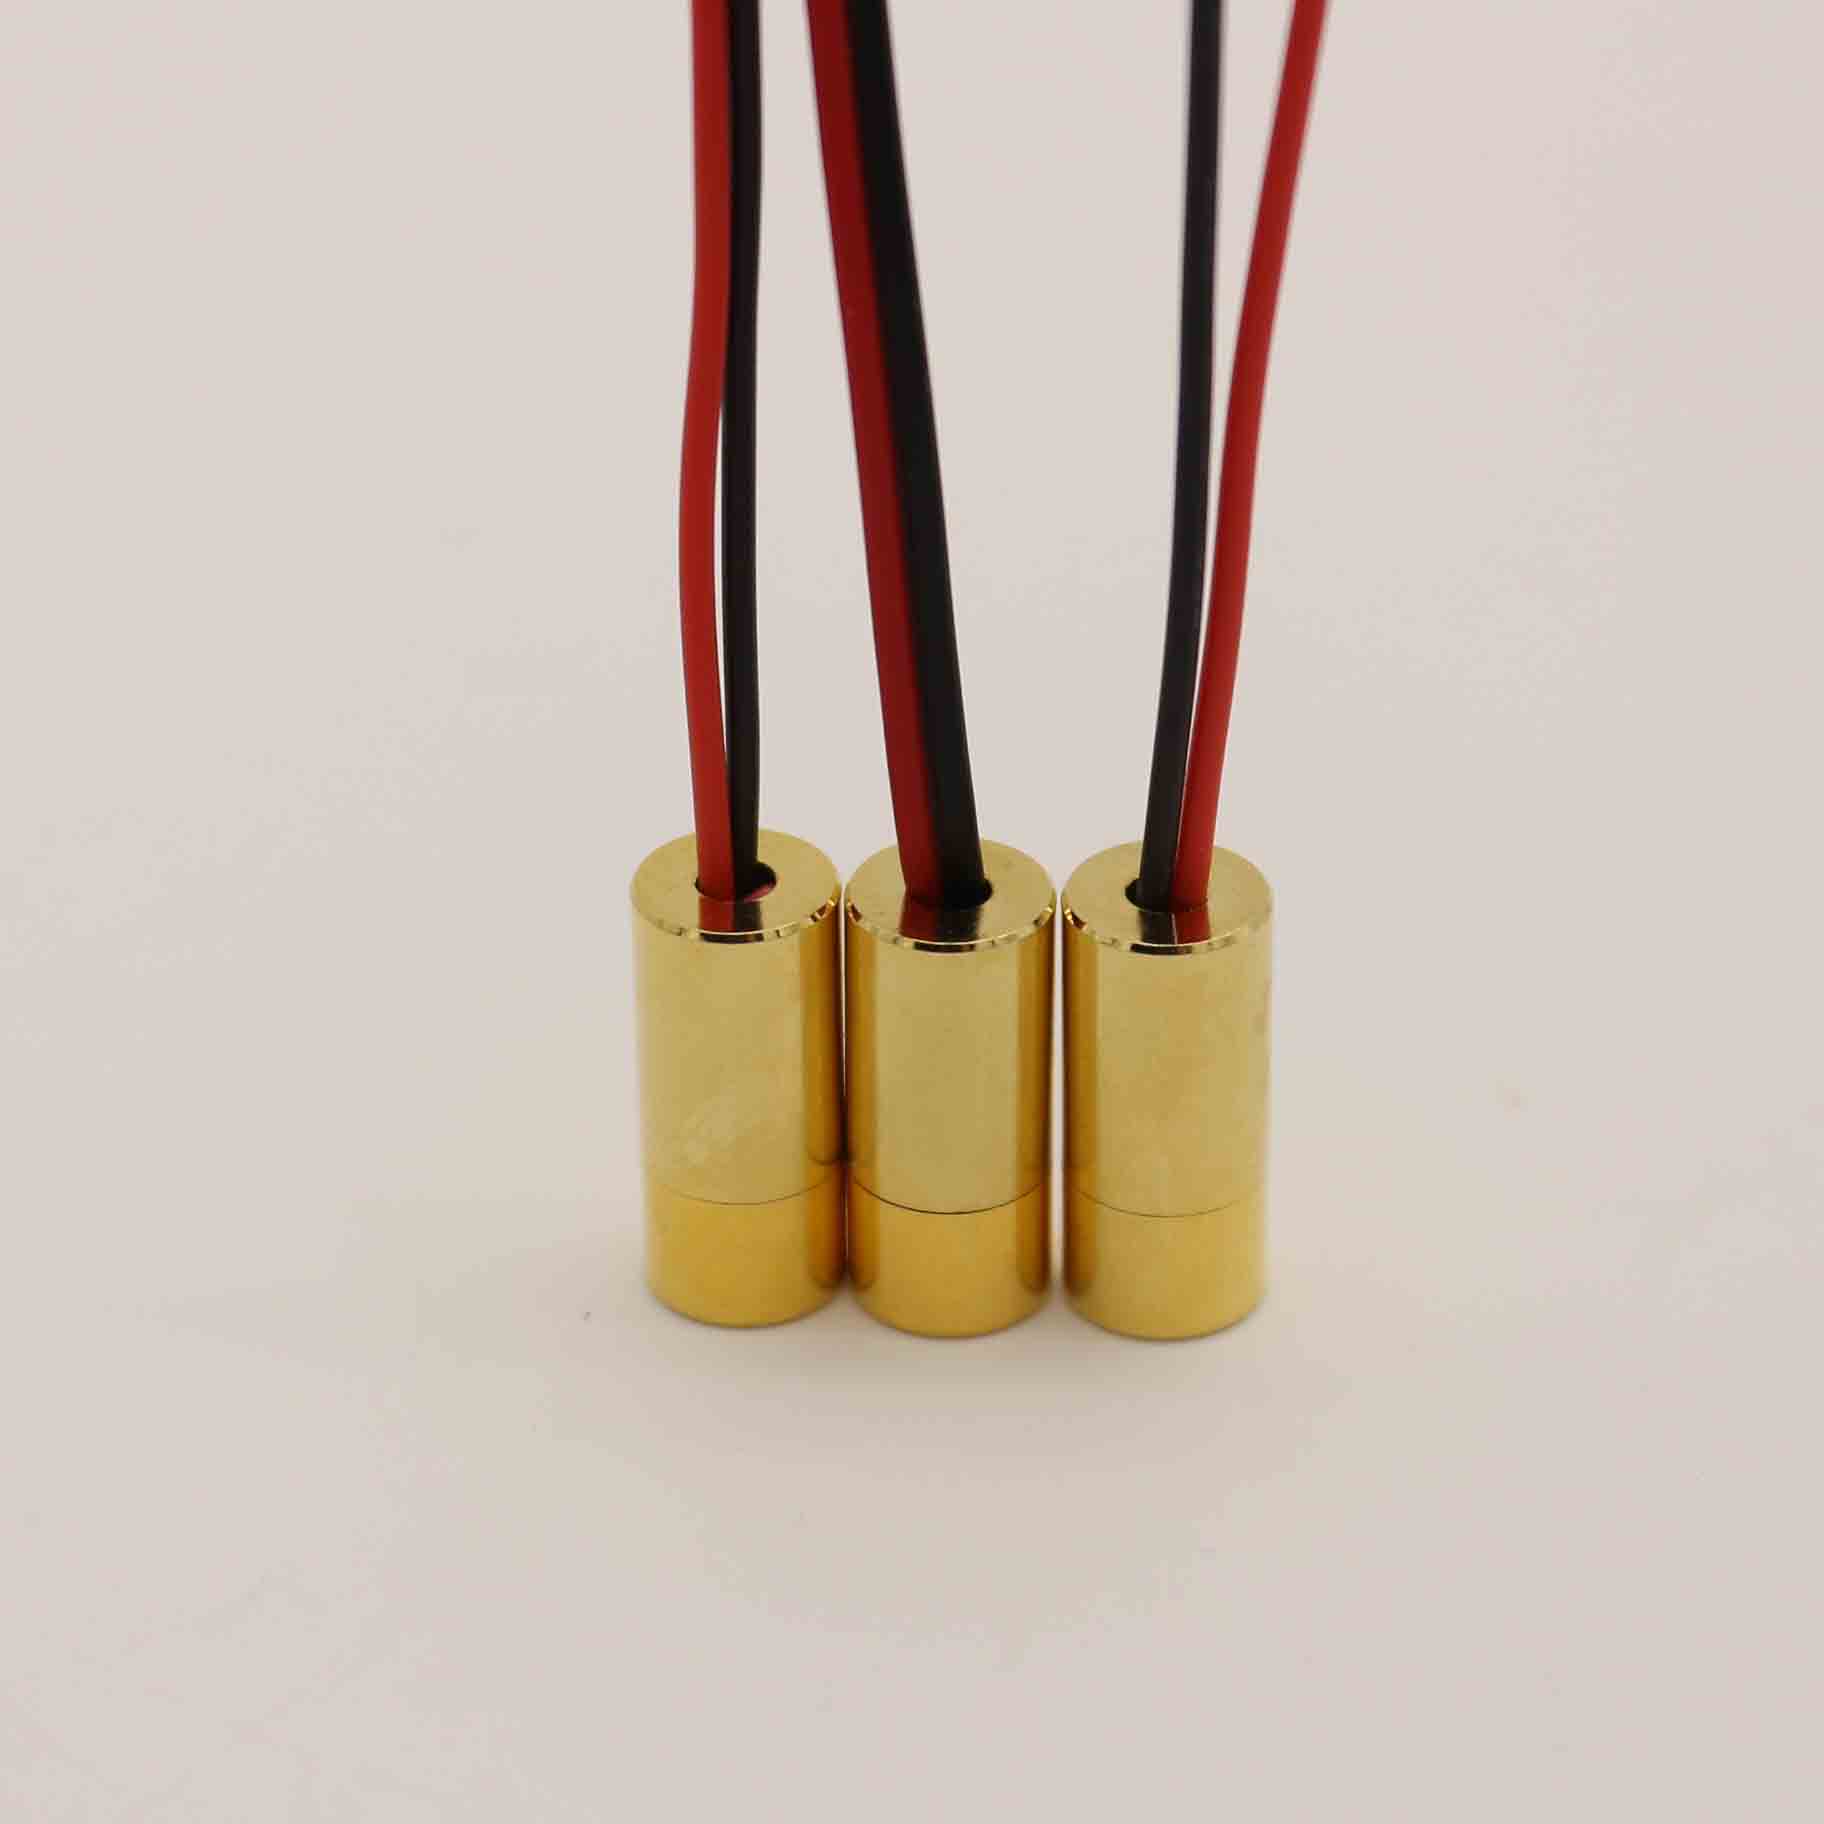 635nm 5mW Collimated Laser Diode Modules 3V 5V Laser Aiming Modules